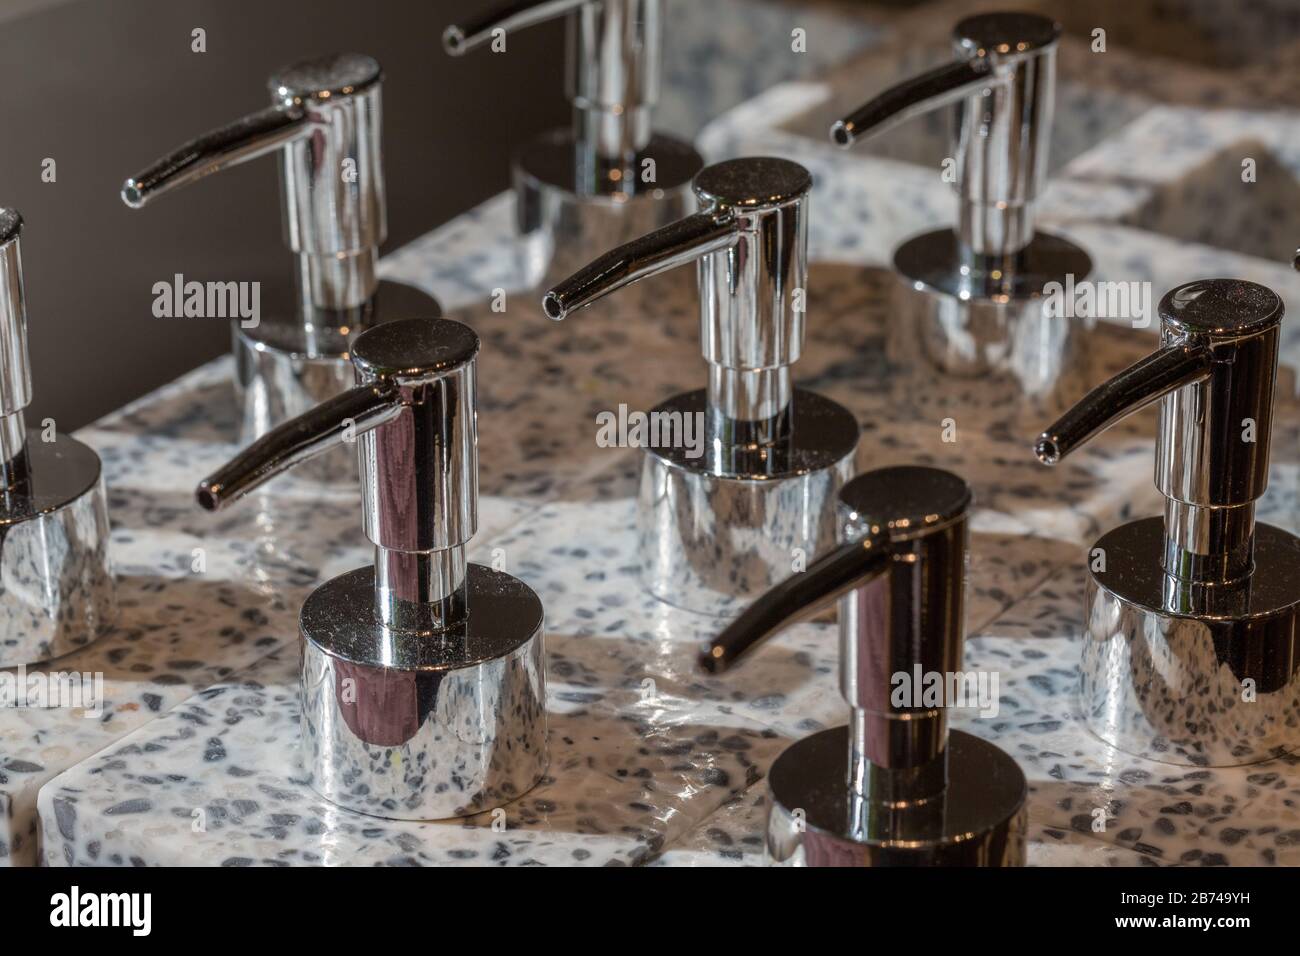 Close up of soap dispensers with metallic head & marble textured body. Symbol for hygiene, sanitary industry, desinfection, washing hands. Stock Photo